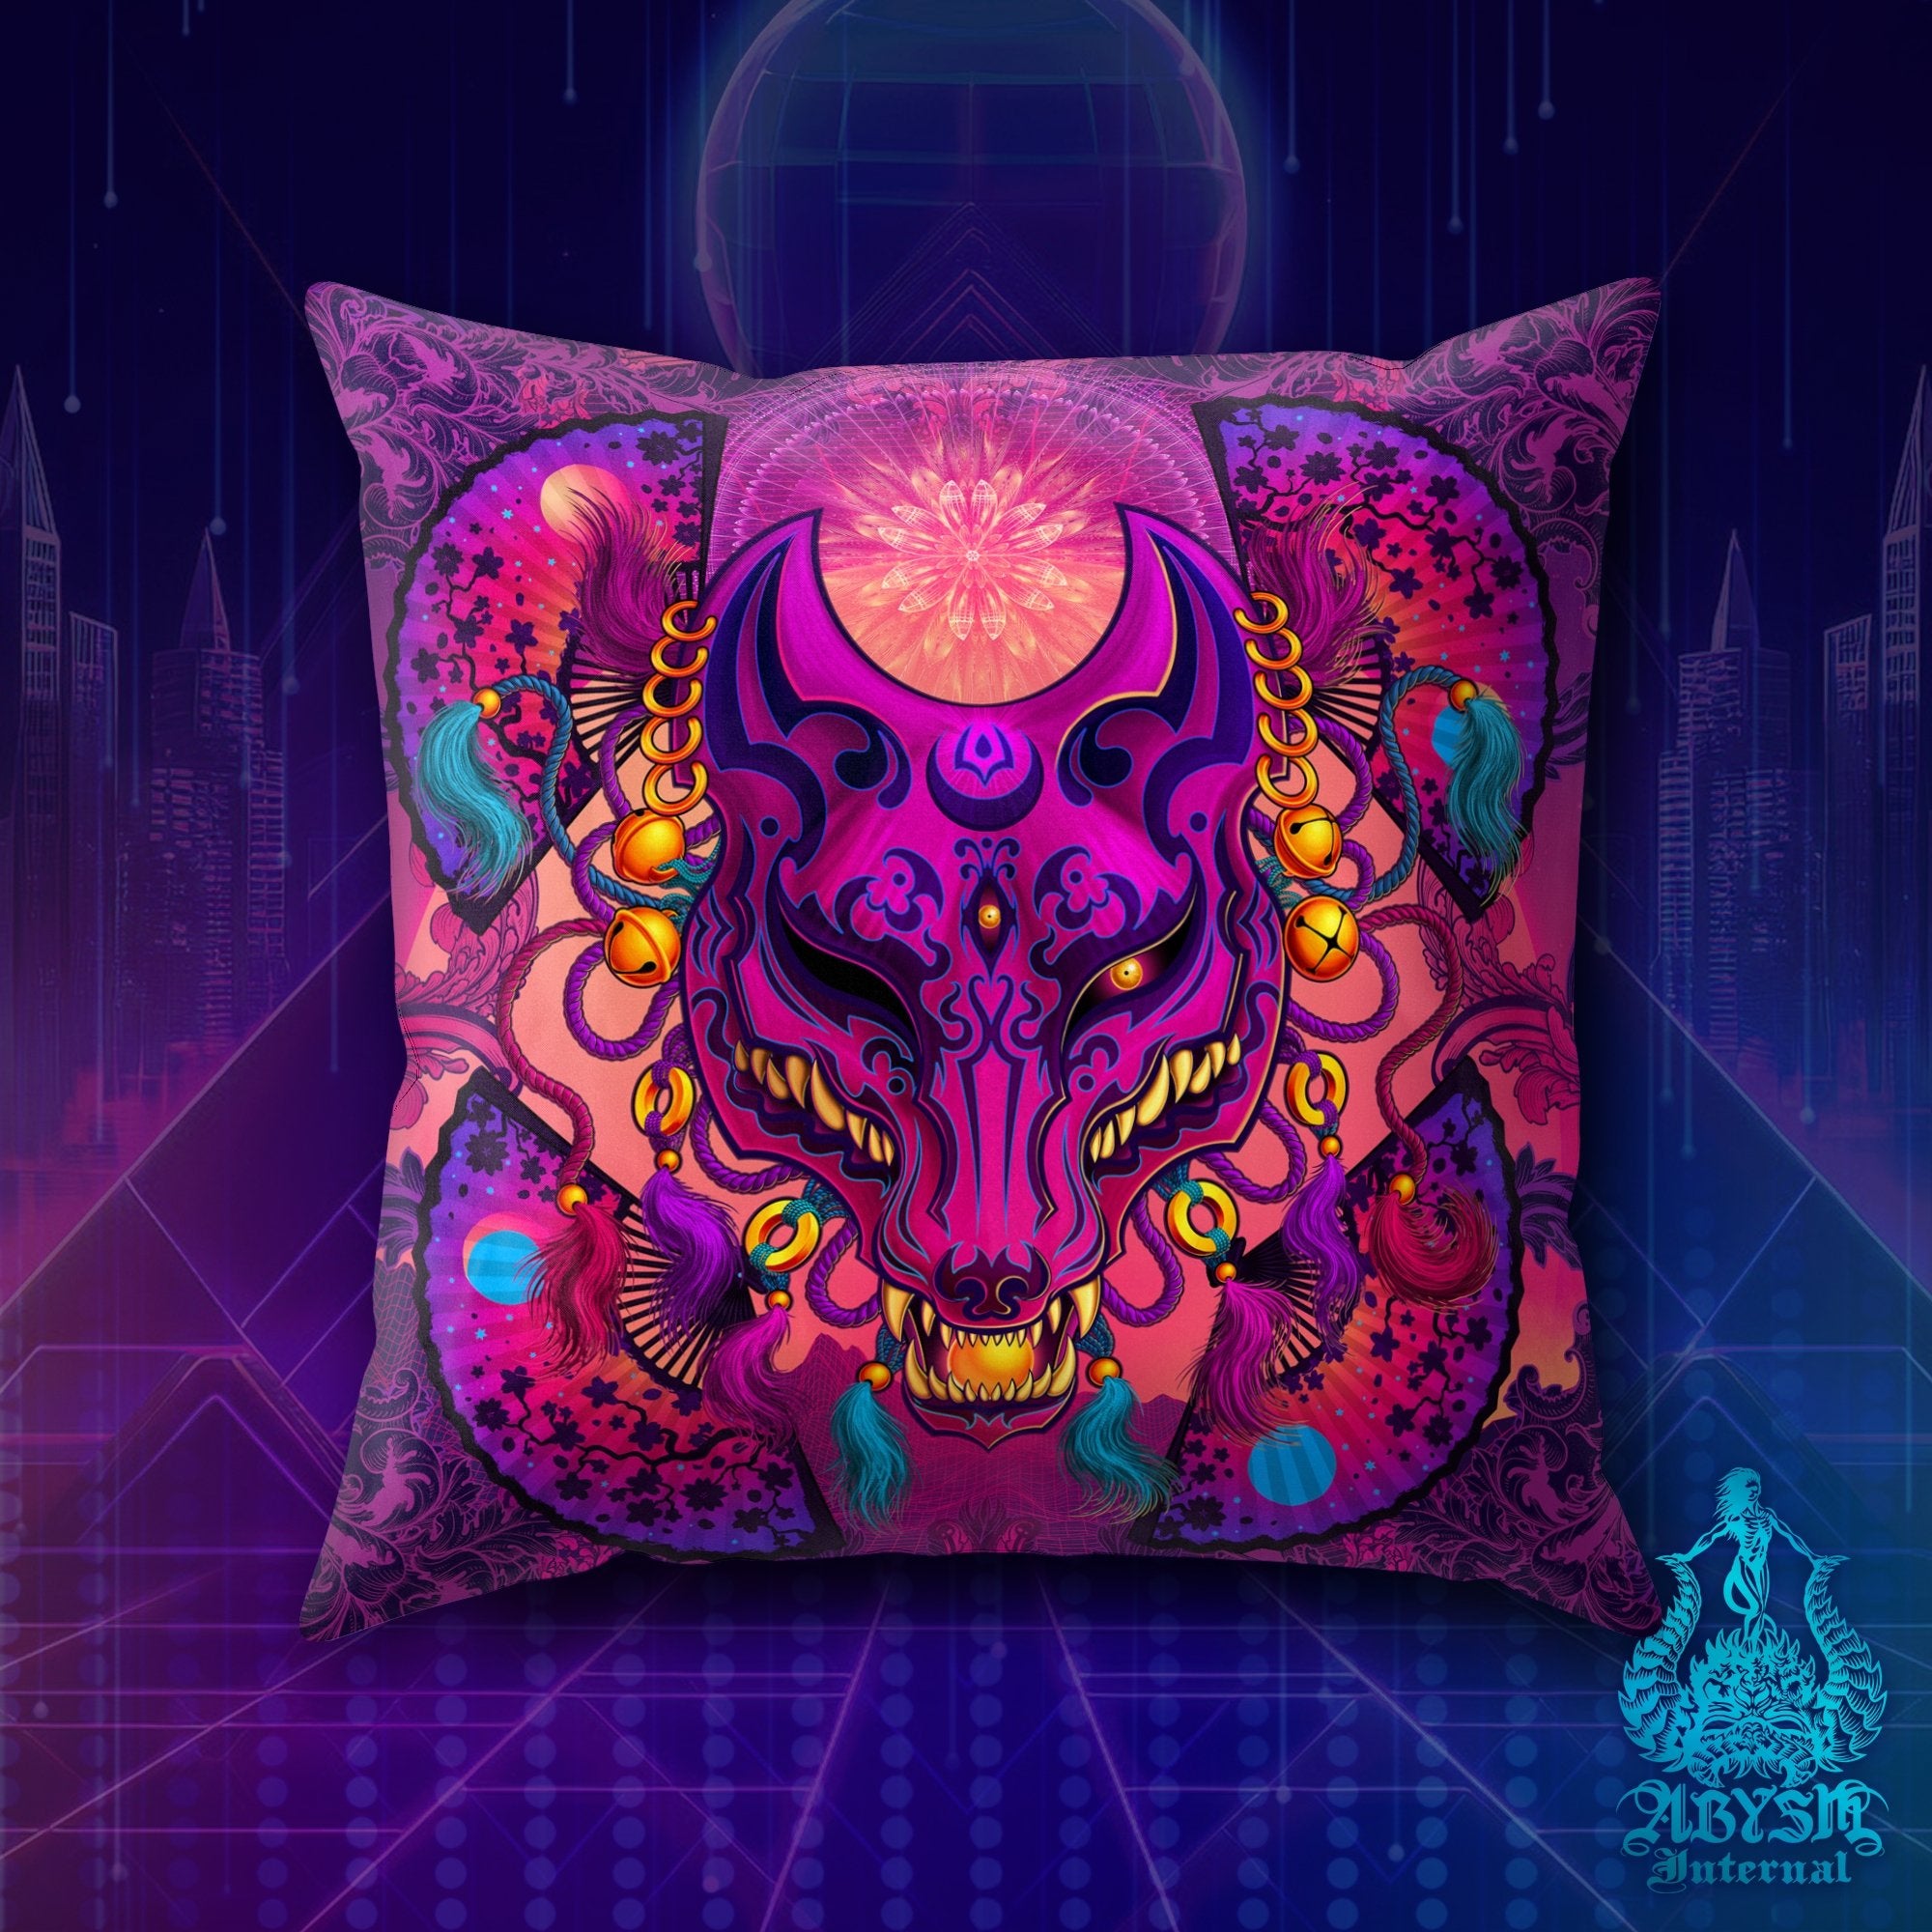 Japanese Vaporwave Throw Pillow, Anime Decorative Accent Cushion, Synthwave and Retrowave 80s Room Decor, Psychedelic Art Print, Gamer Gift - Kitsune - Abysm Internal